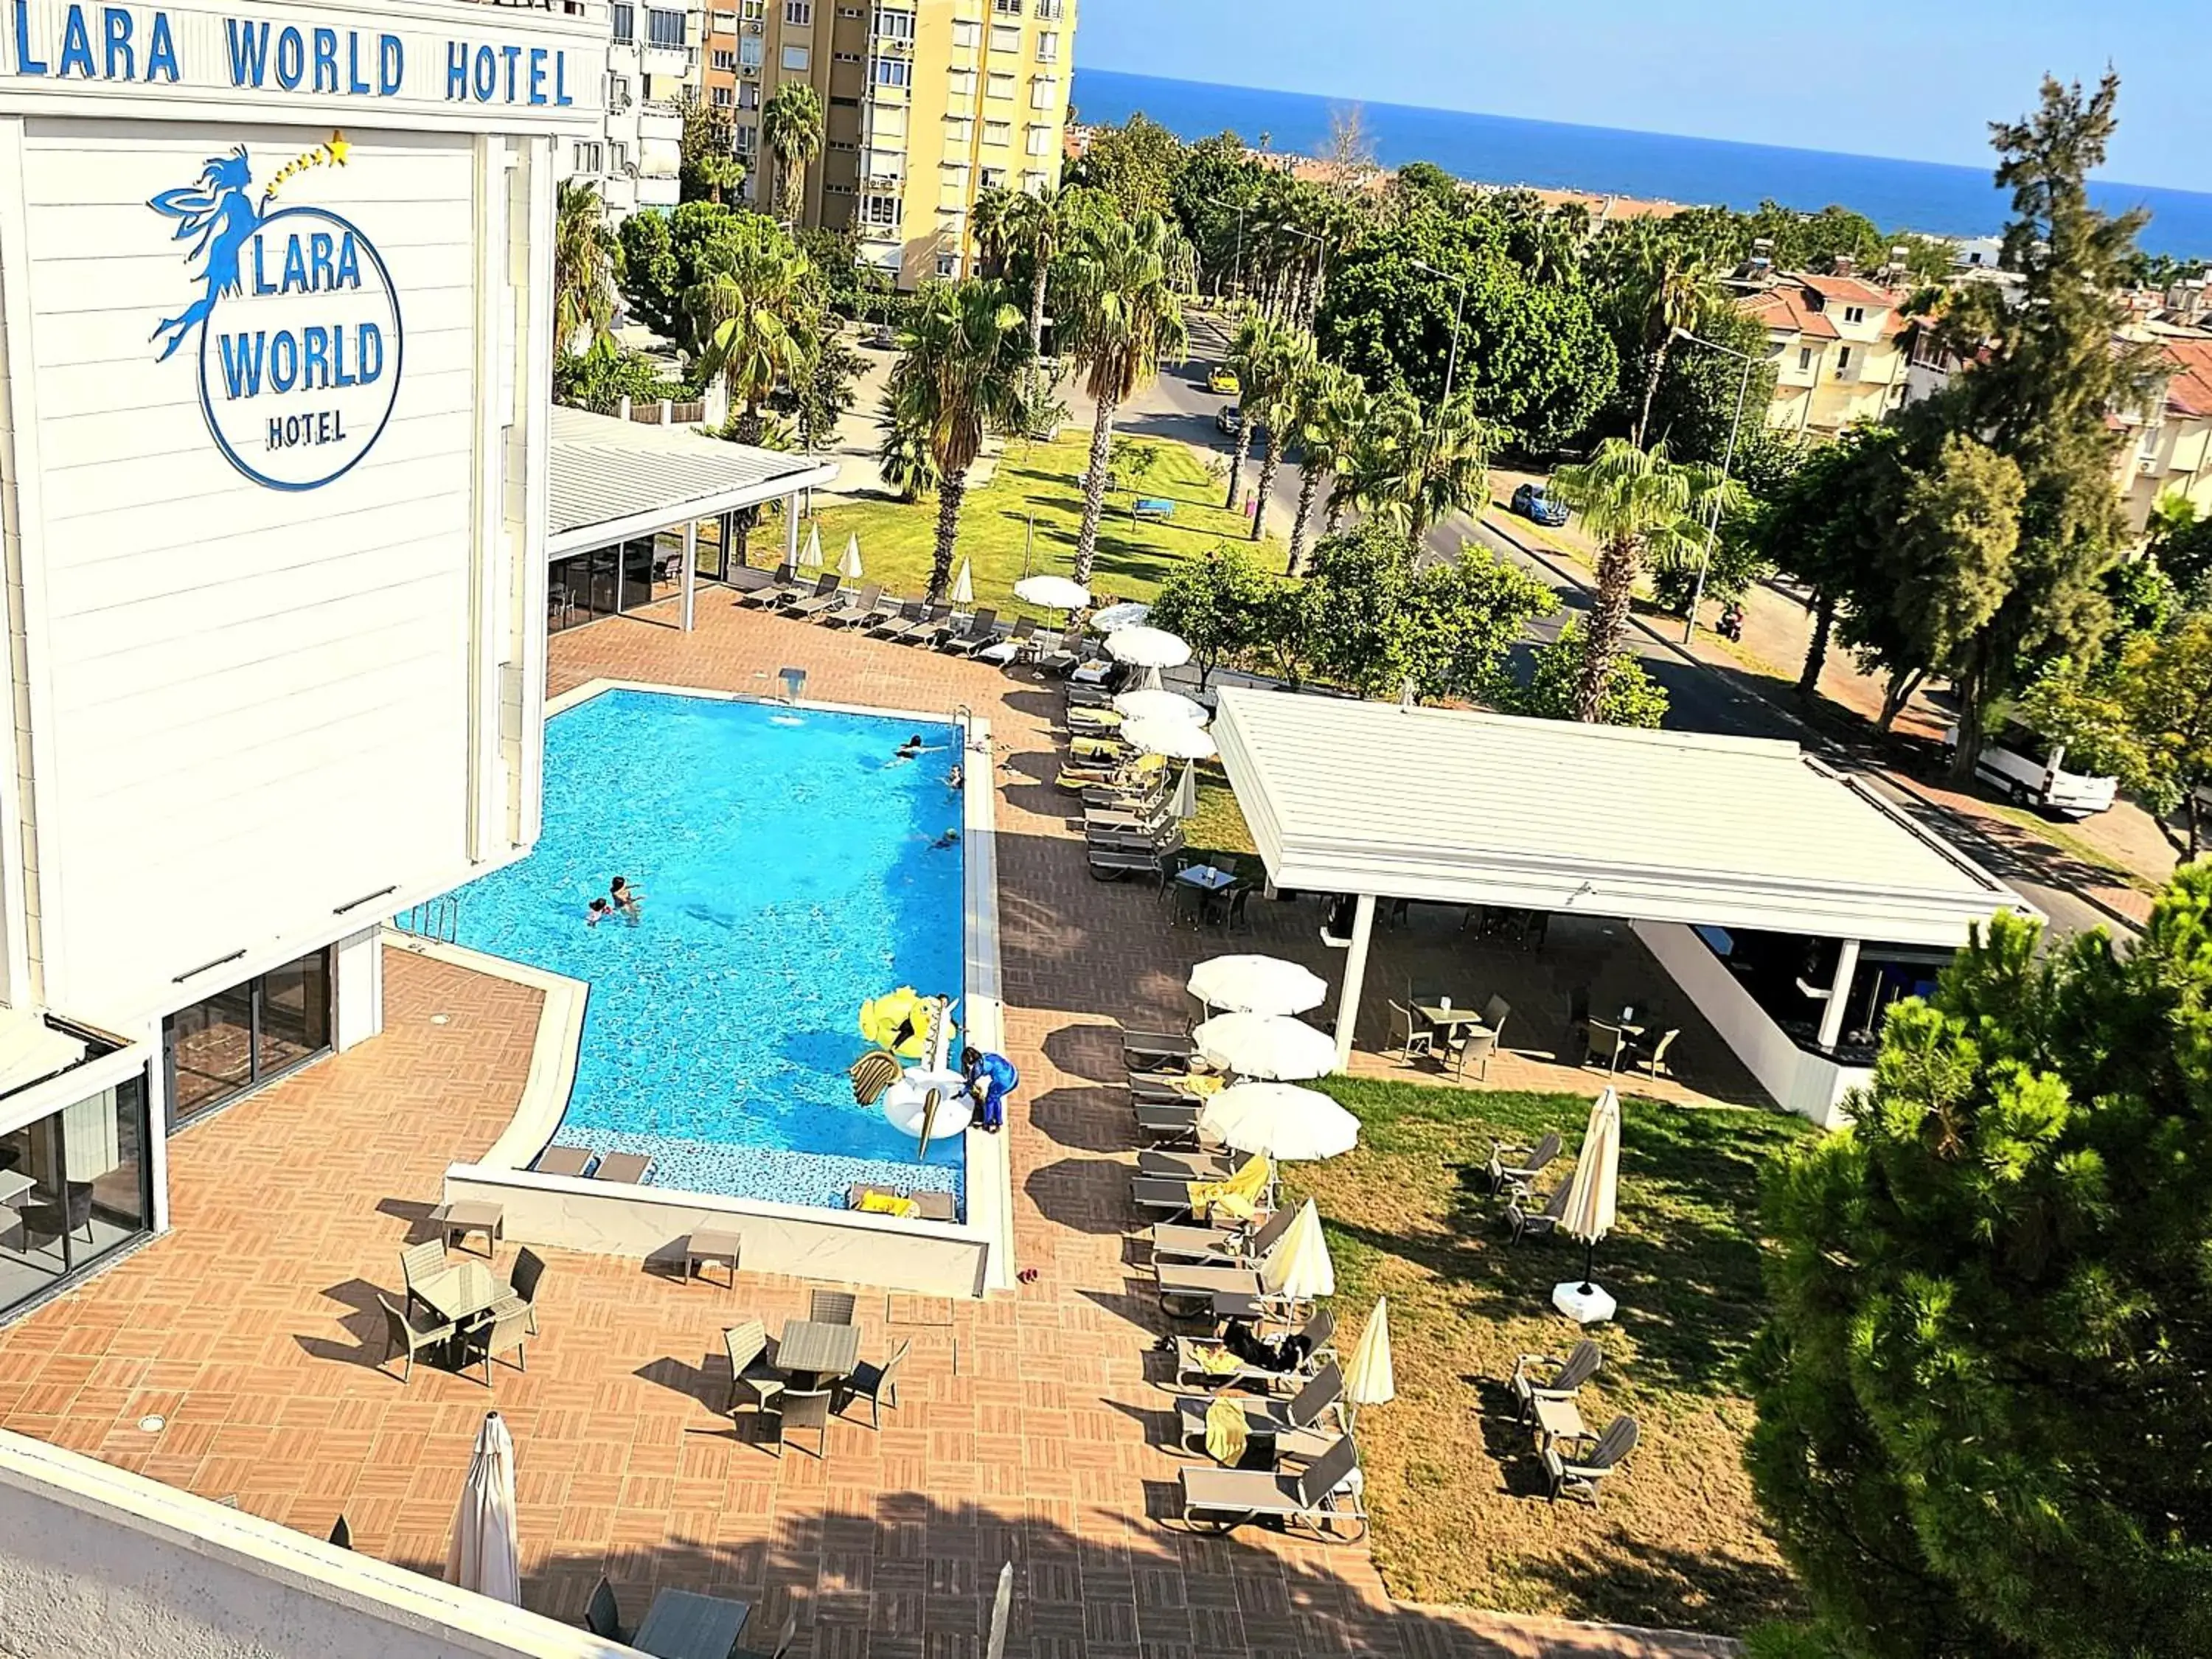 Property building, Pool View in Lara World Hotel